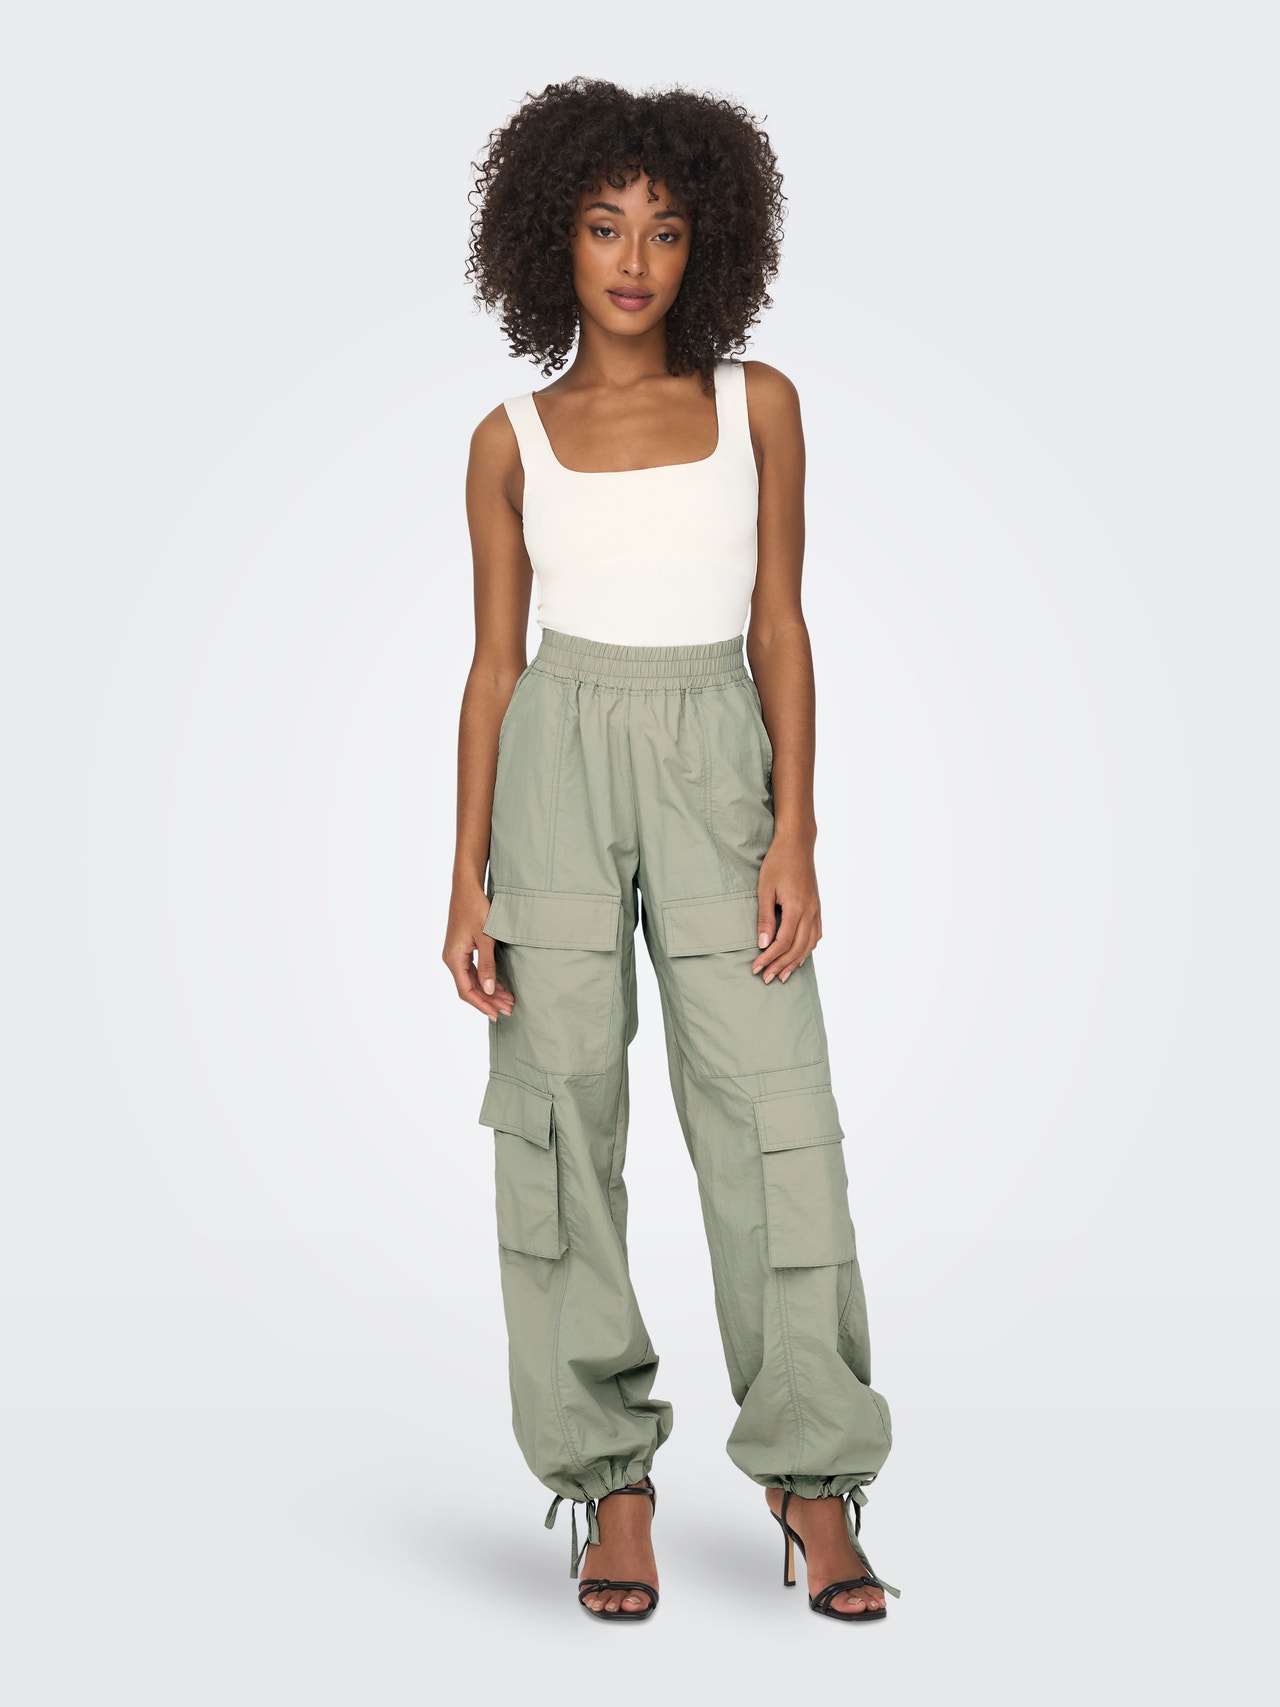 ONLY Mid waist CARGO PARACHUTE PANT -Seagrass - 15302732